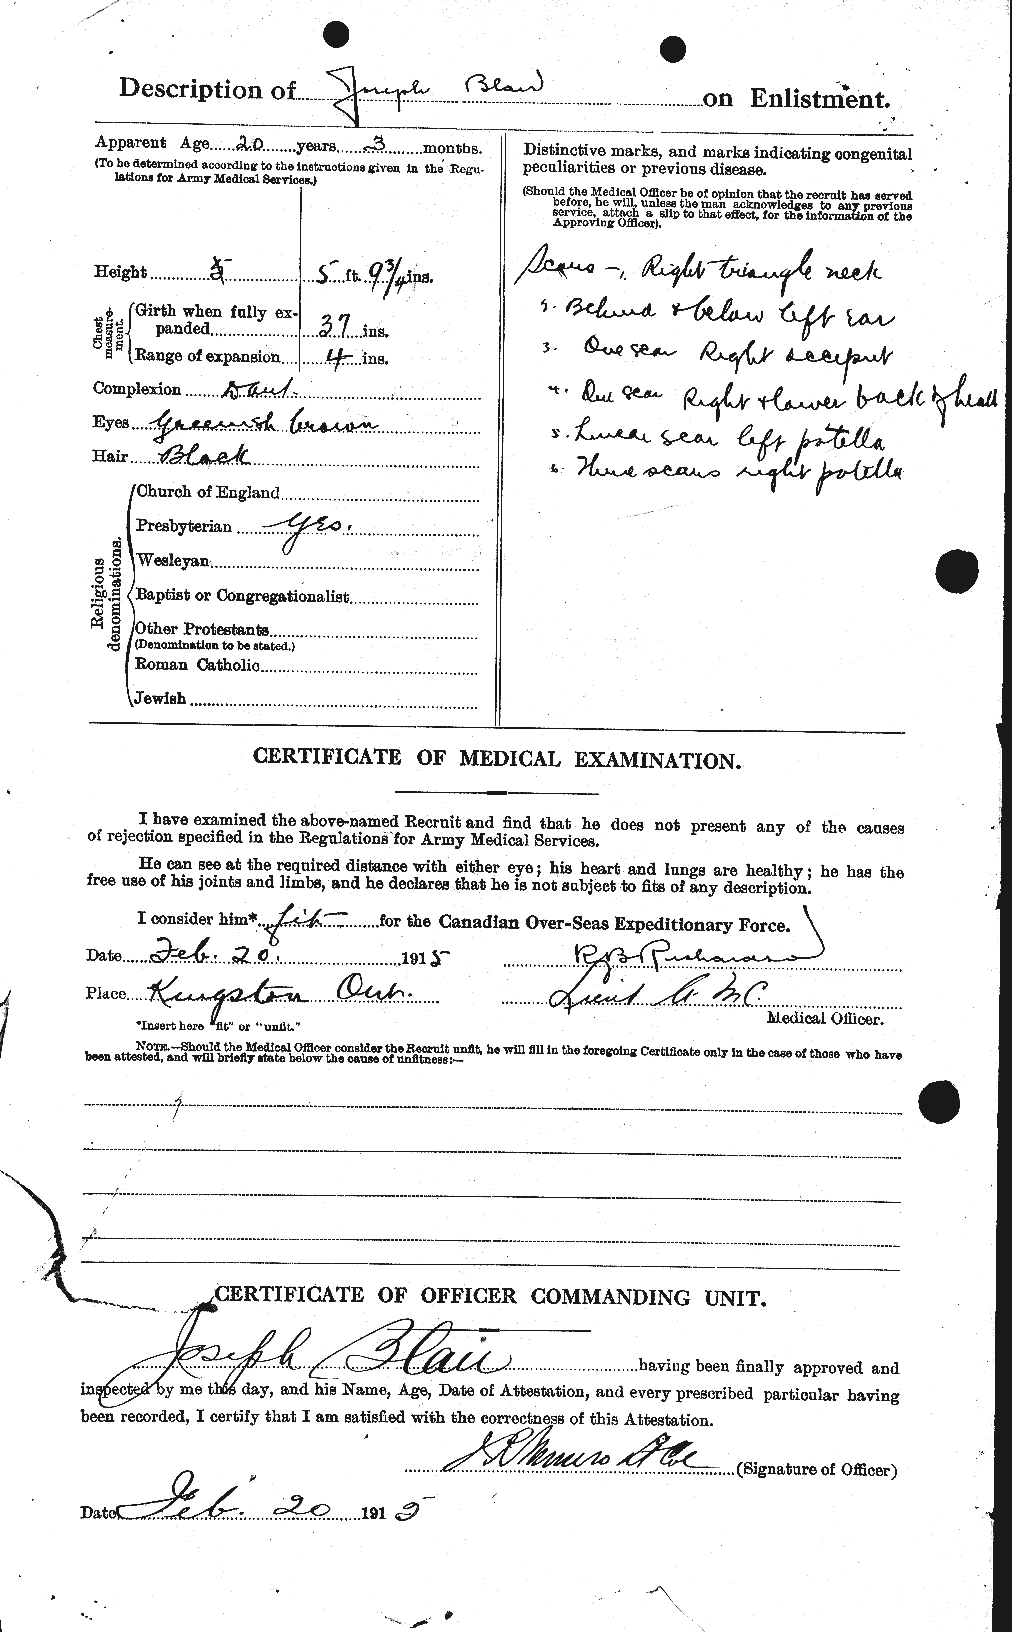 Personnel Records of the First World War - CEF 243104b